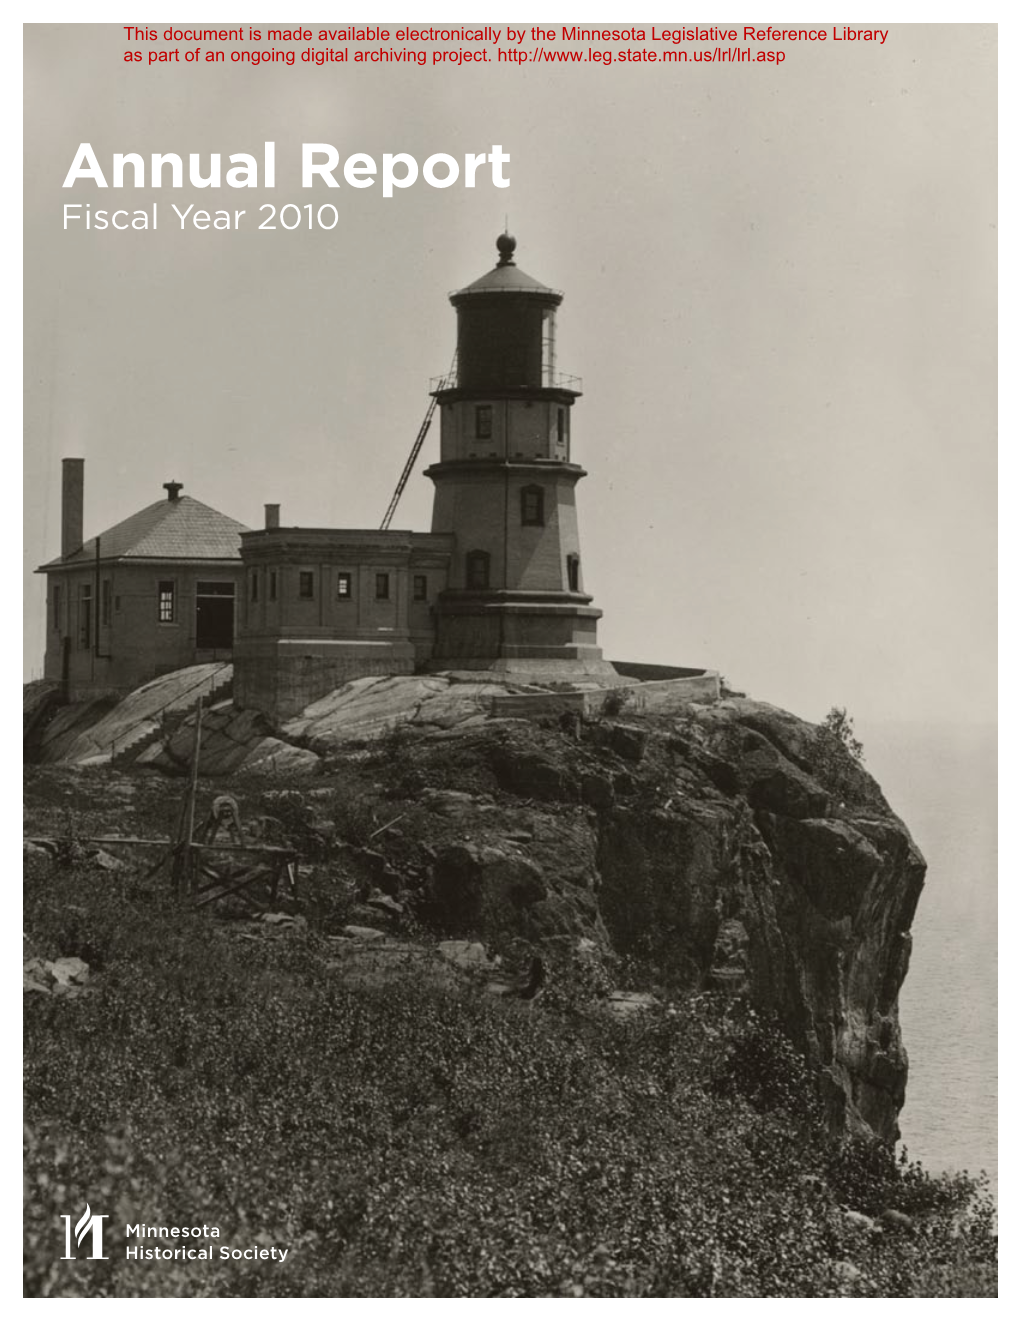 Annual Report Fiscal Year 2010 in This Past Year, the Society Has Continued to Advance the Understanding of and Access to History in Our State